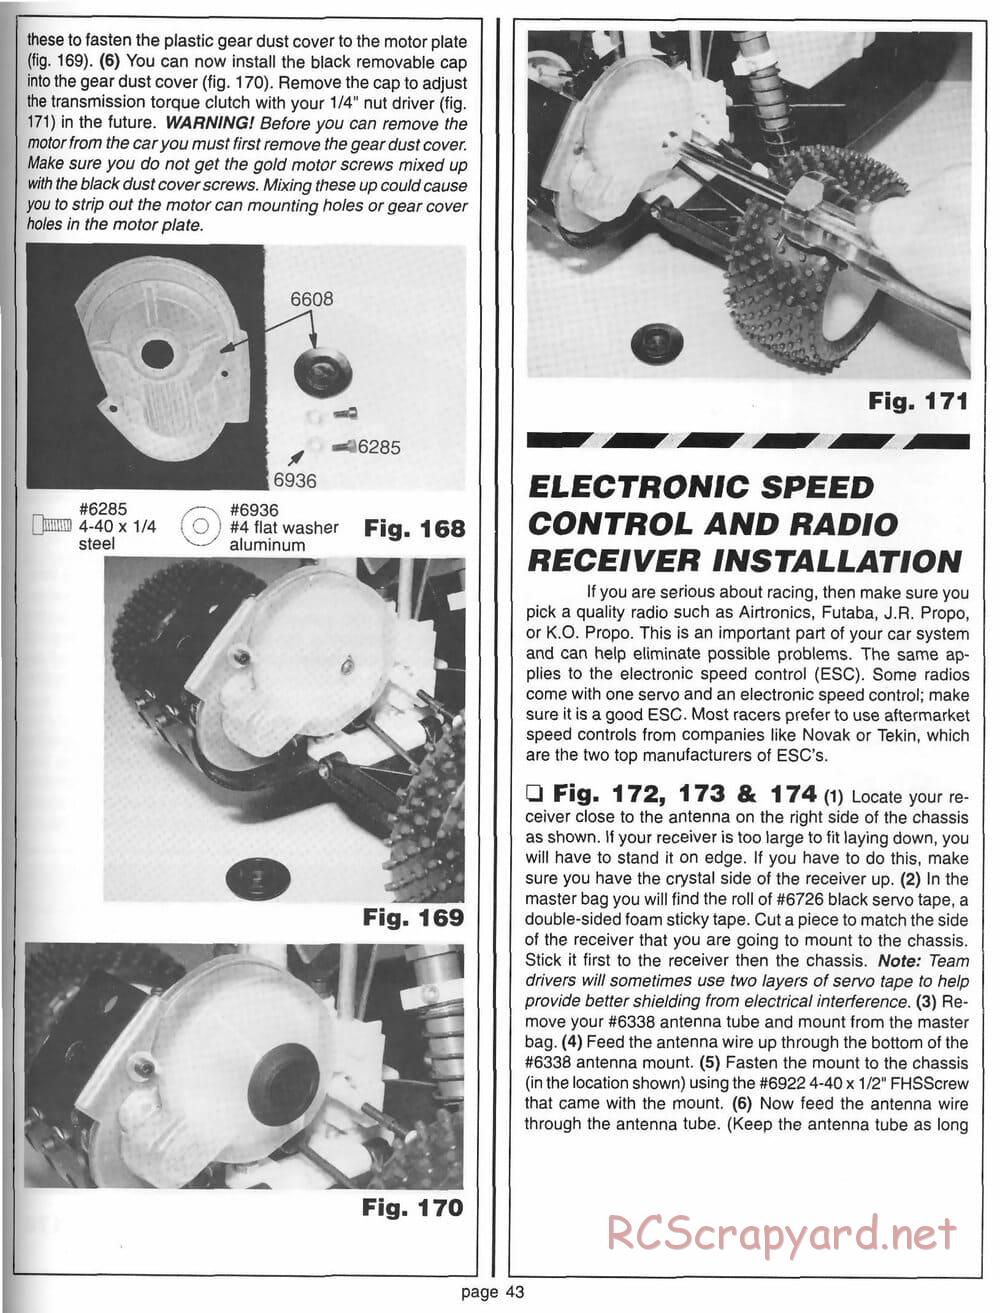 Team Associated - RC10 World's Car - 1994 - 6037 - Manual - Page 42